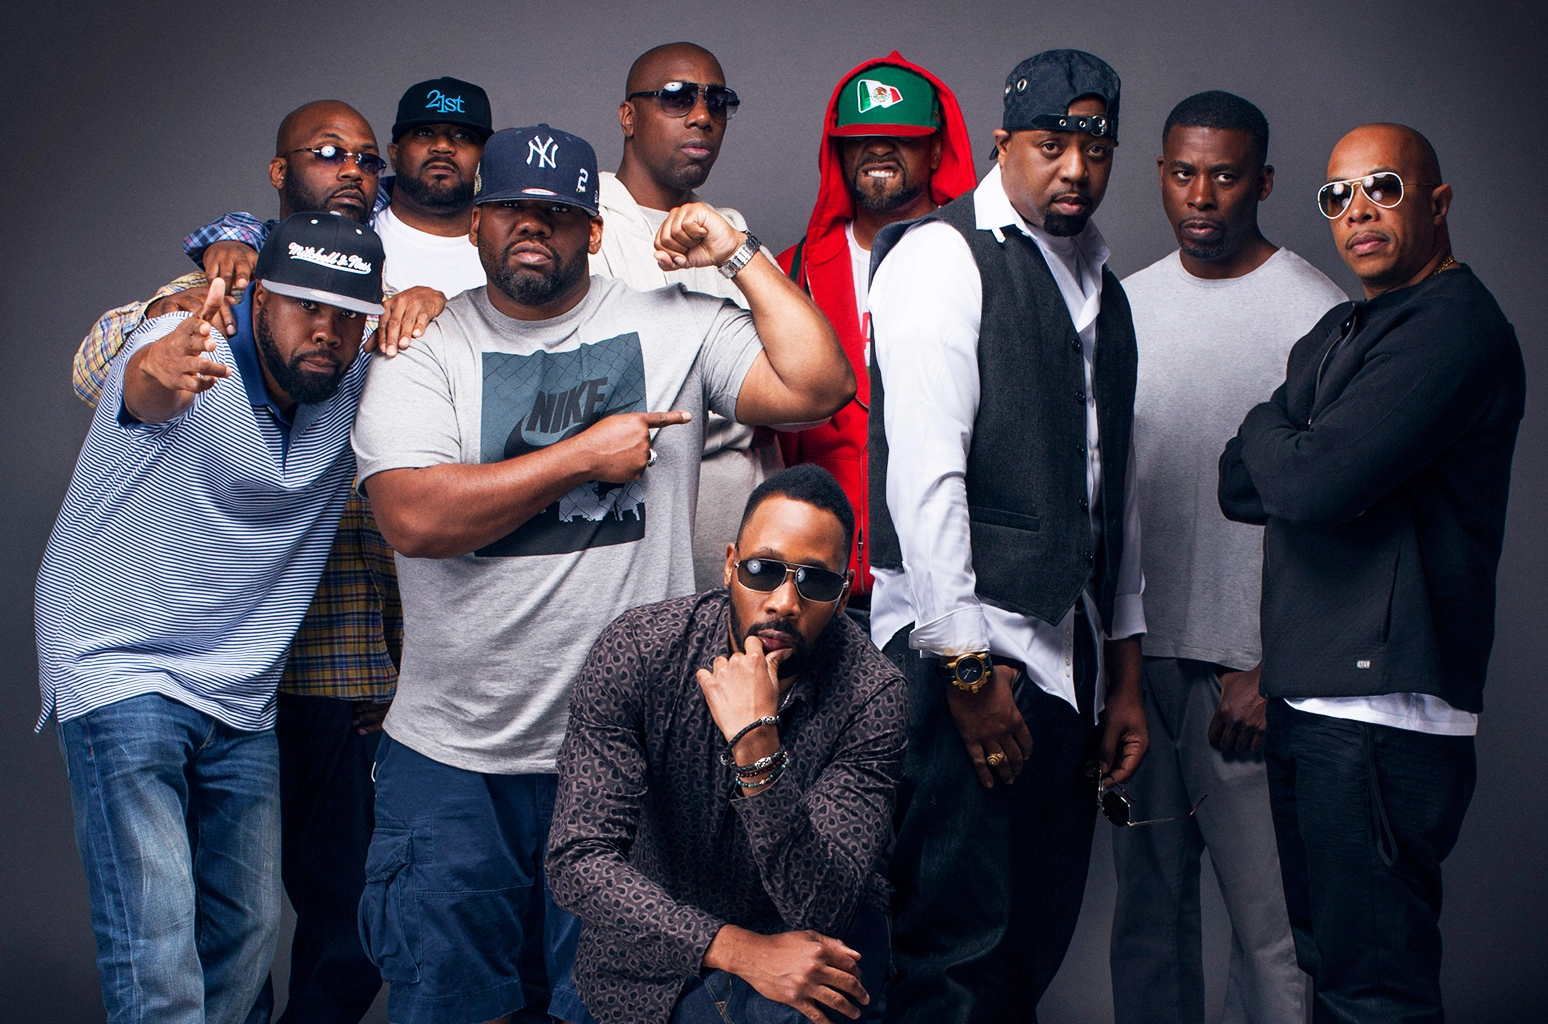 Wu-Tang Clan celebrates 25th anniversary with vinyl revamp of ‘Wu-Tang Forever’